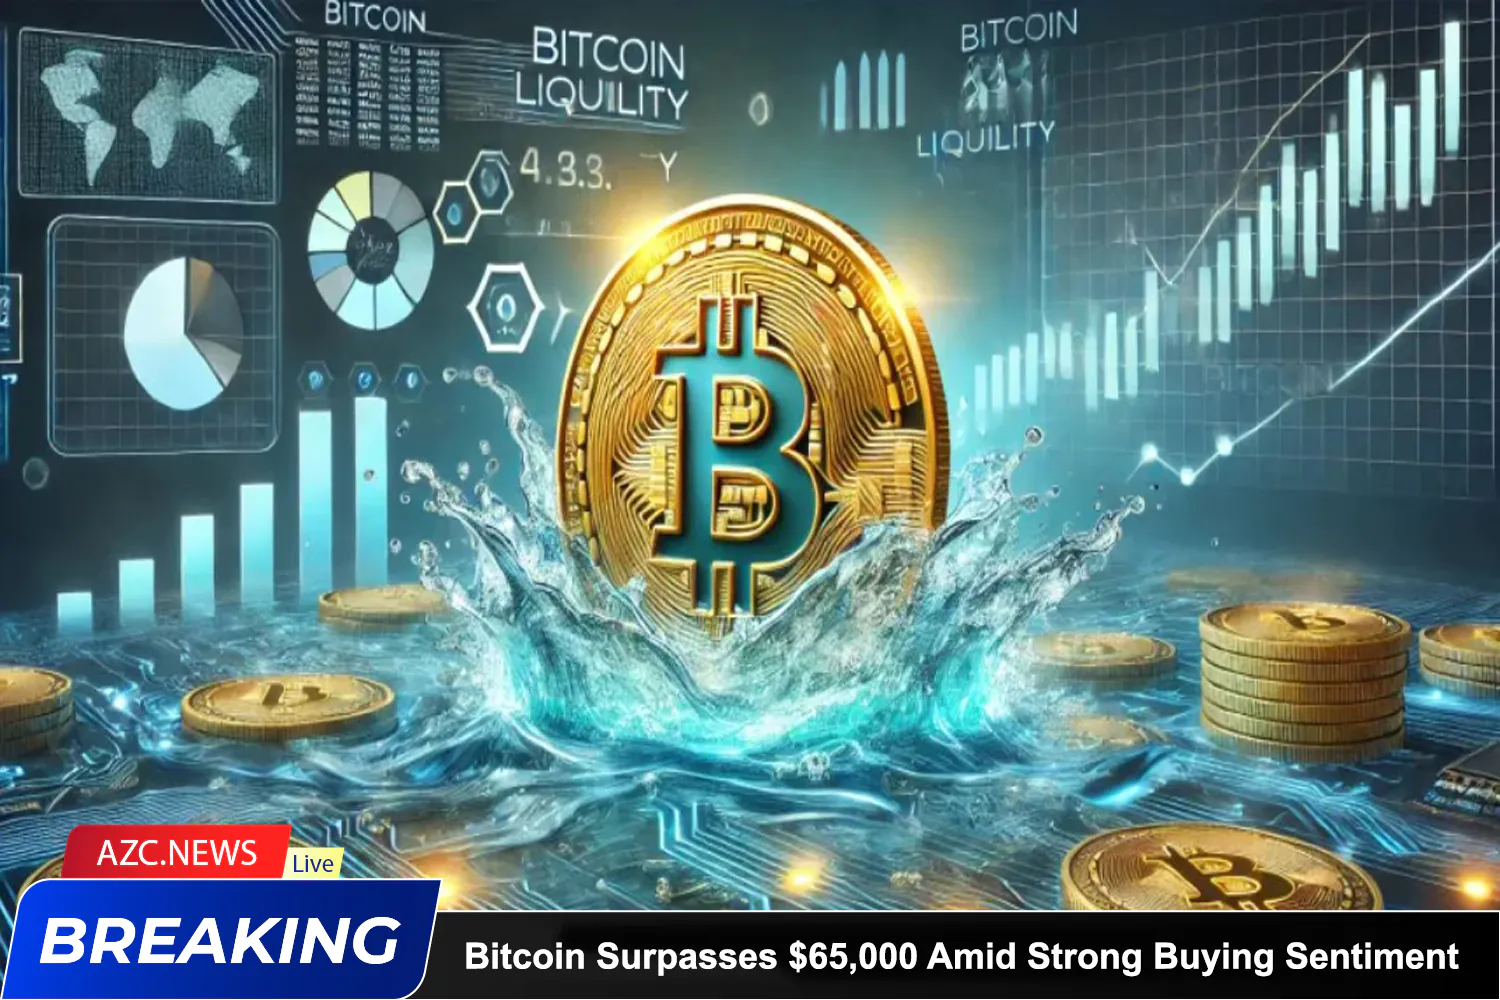 Azcnews Bitcoin Surpasses $65,000 Amid Strong Buying Sentiment